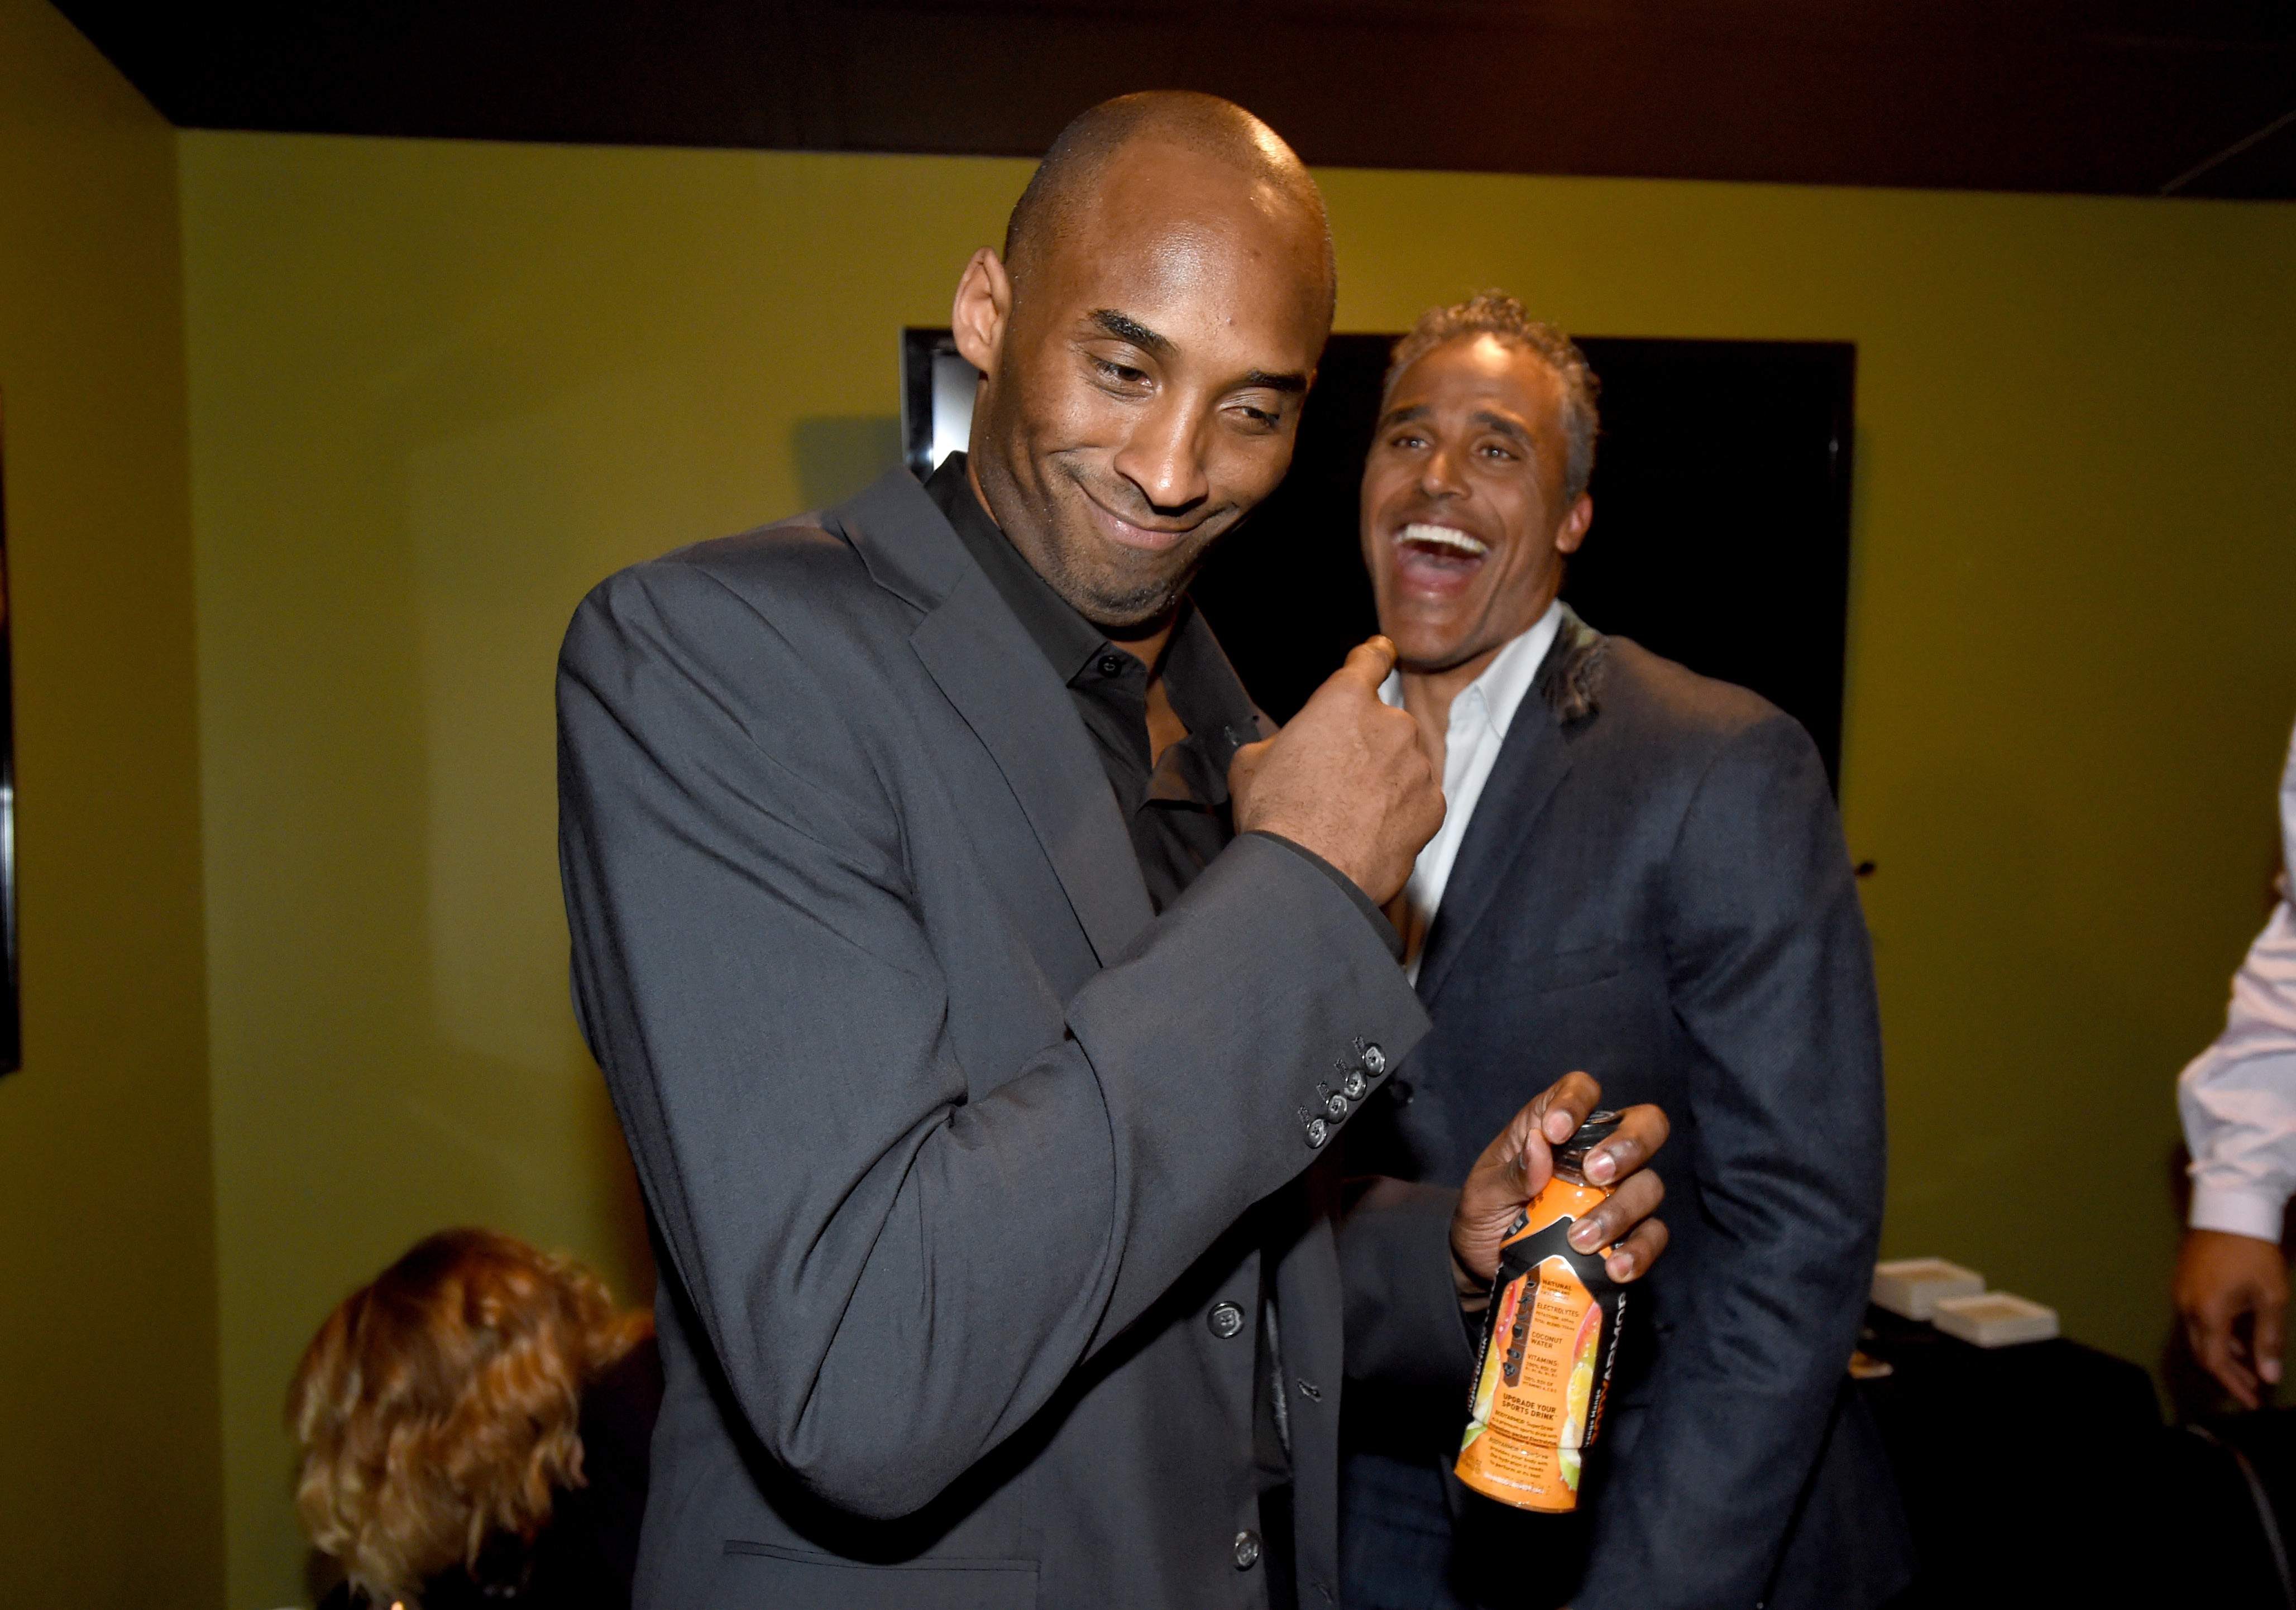 "LOS ANGELES, CALIFORNIA - MARCH 29: American Express Teamed Up With Kobe Bryant at Conga Room on March 29, 2016 in Los Angeles, California. (Photo by Bernstein Associates/Getty Images for American Express )"